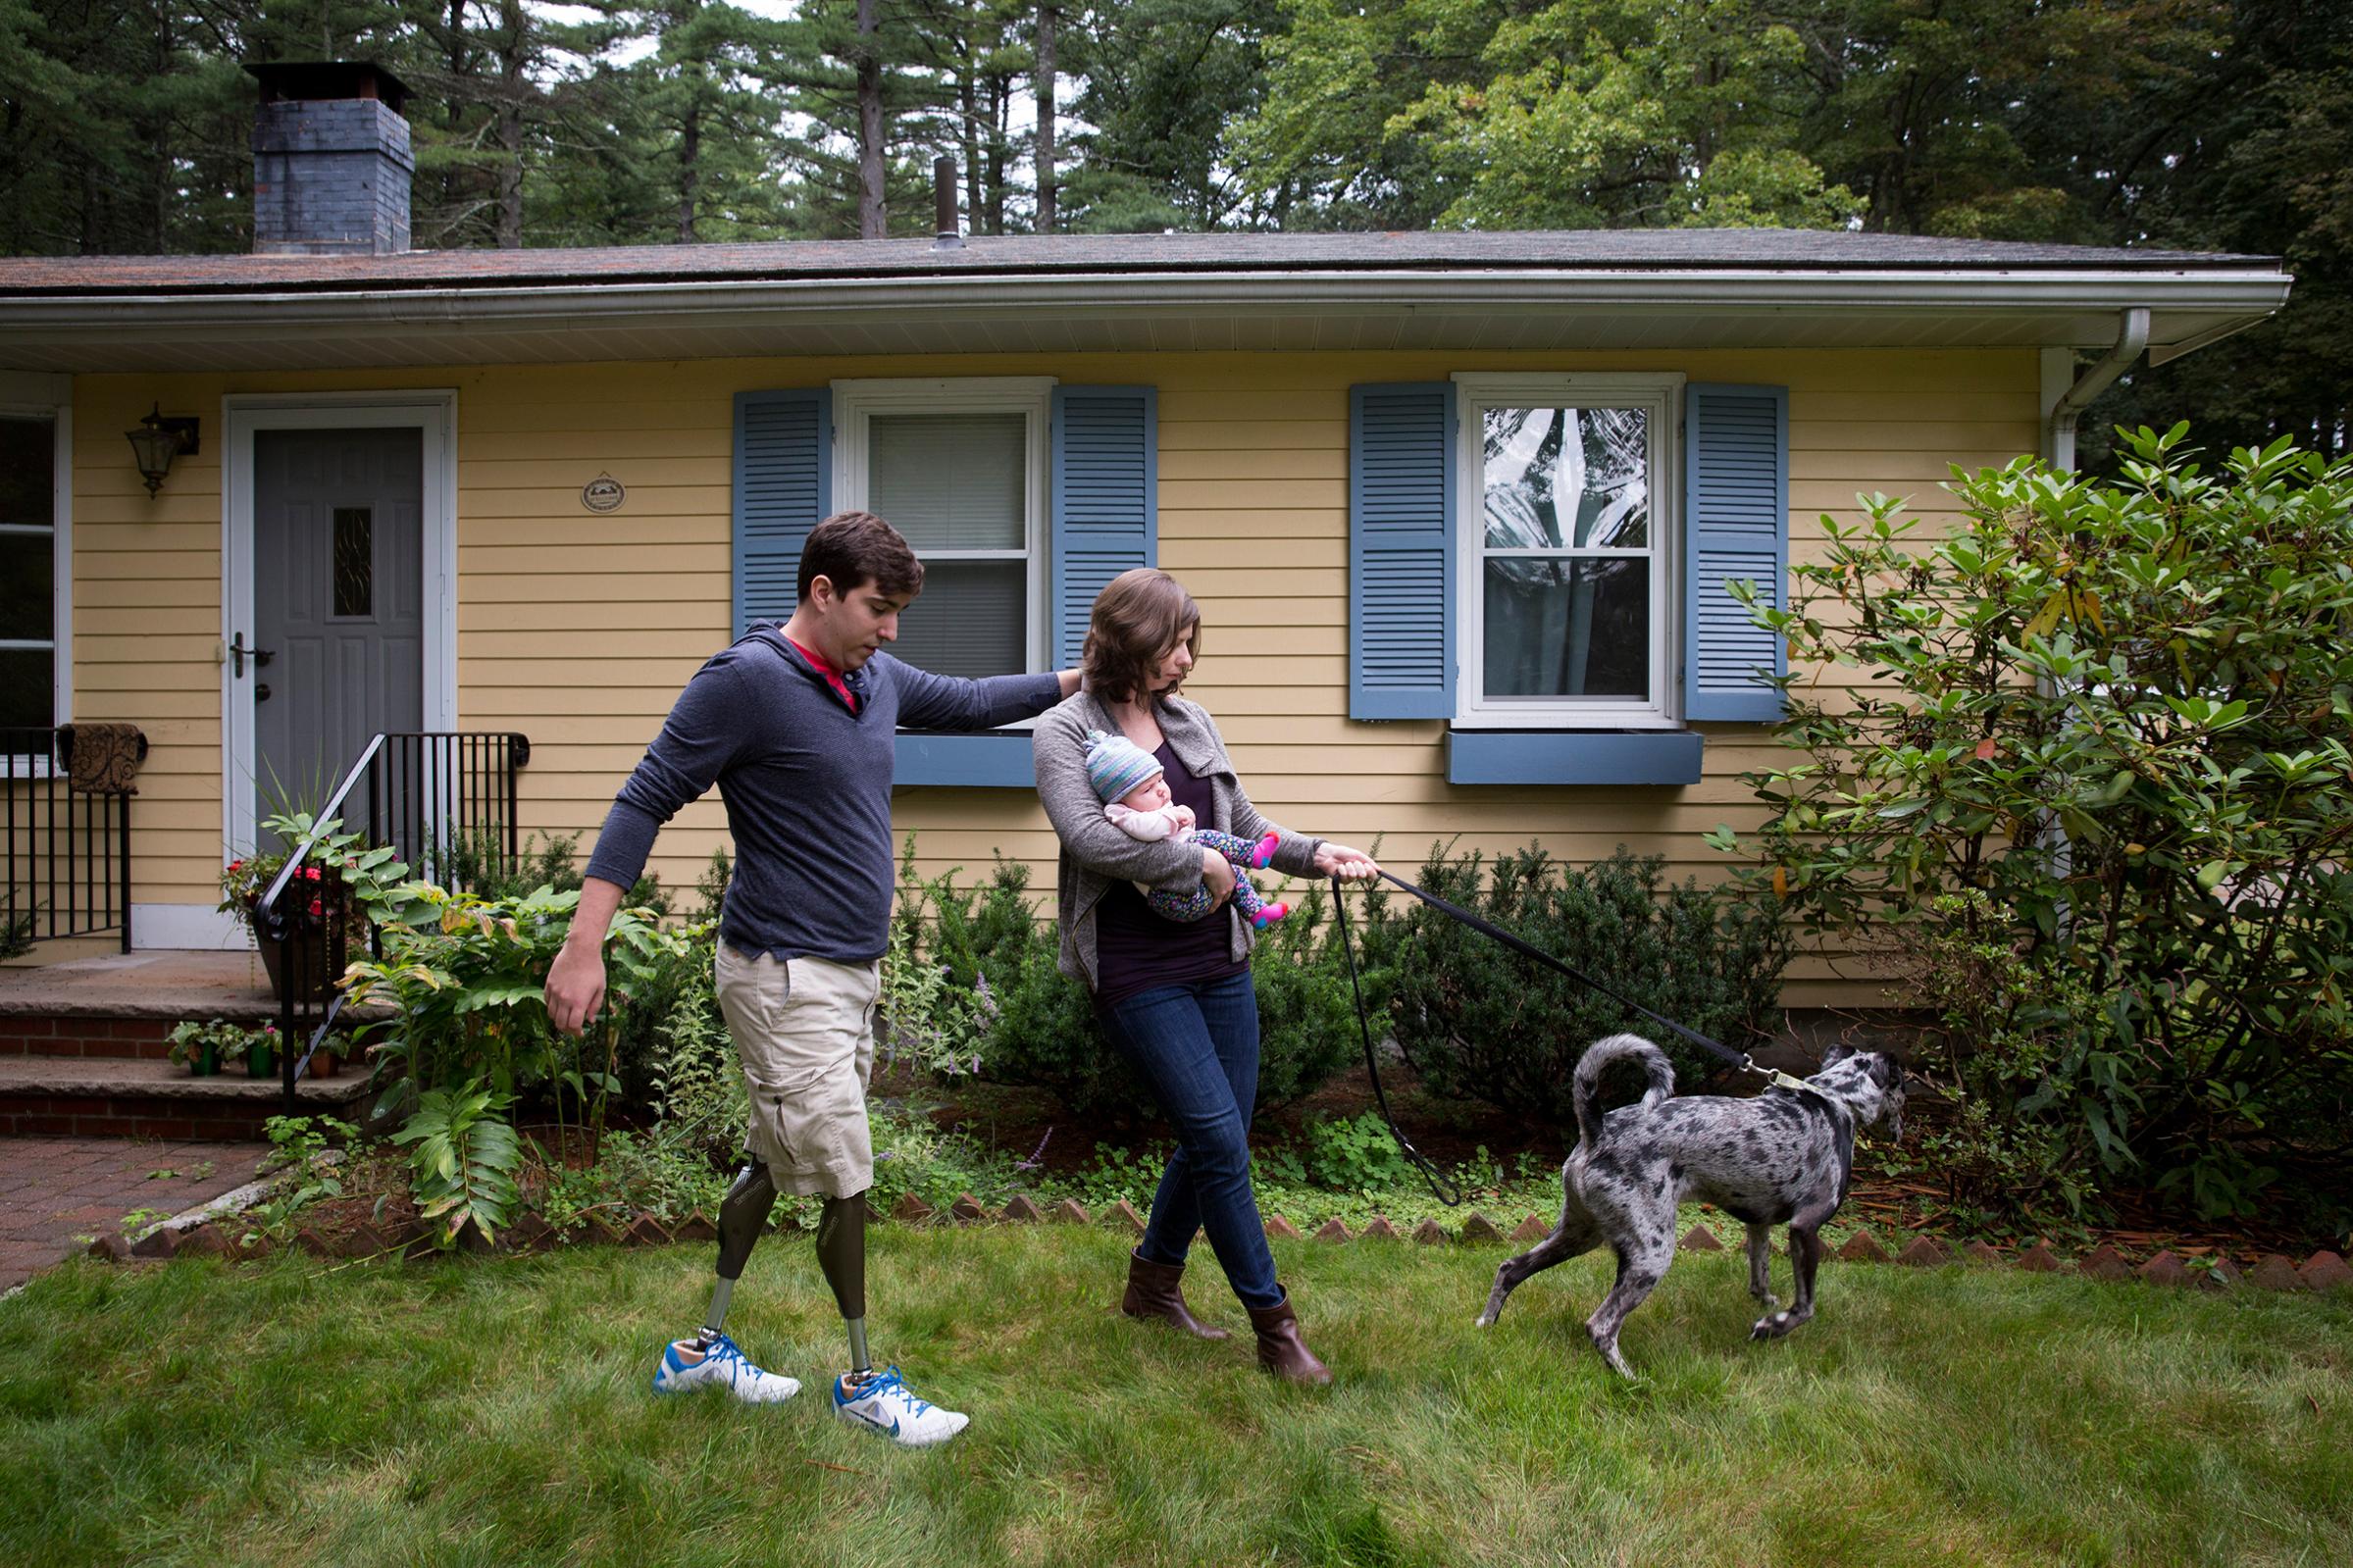 Jeff Bauman, who lost both of his legs in the Boston Marathon bombing, with Erin Hurley and their 2-month-old daughter, Nora, and dog, Bandit, in Boston, Sept. 16, 2014.